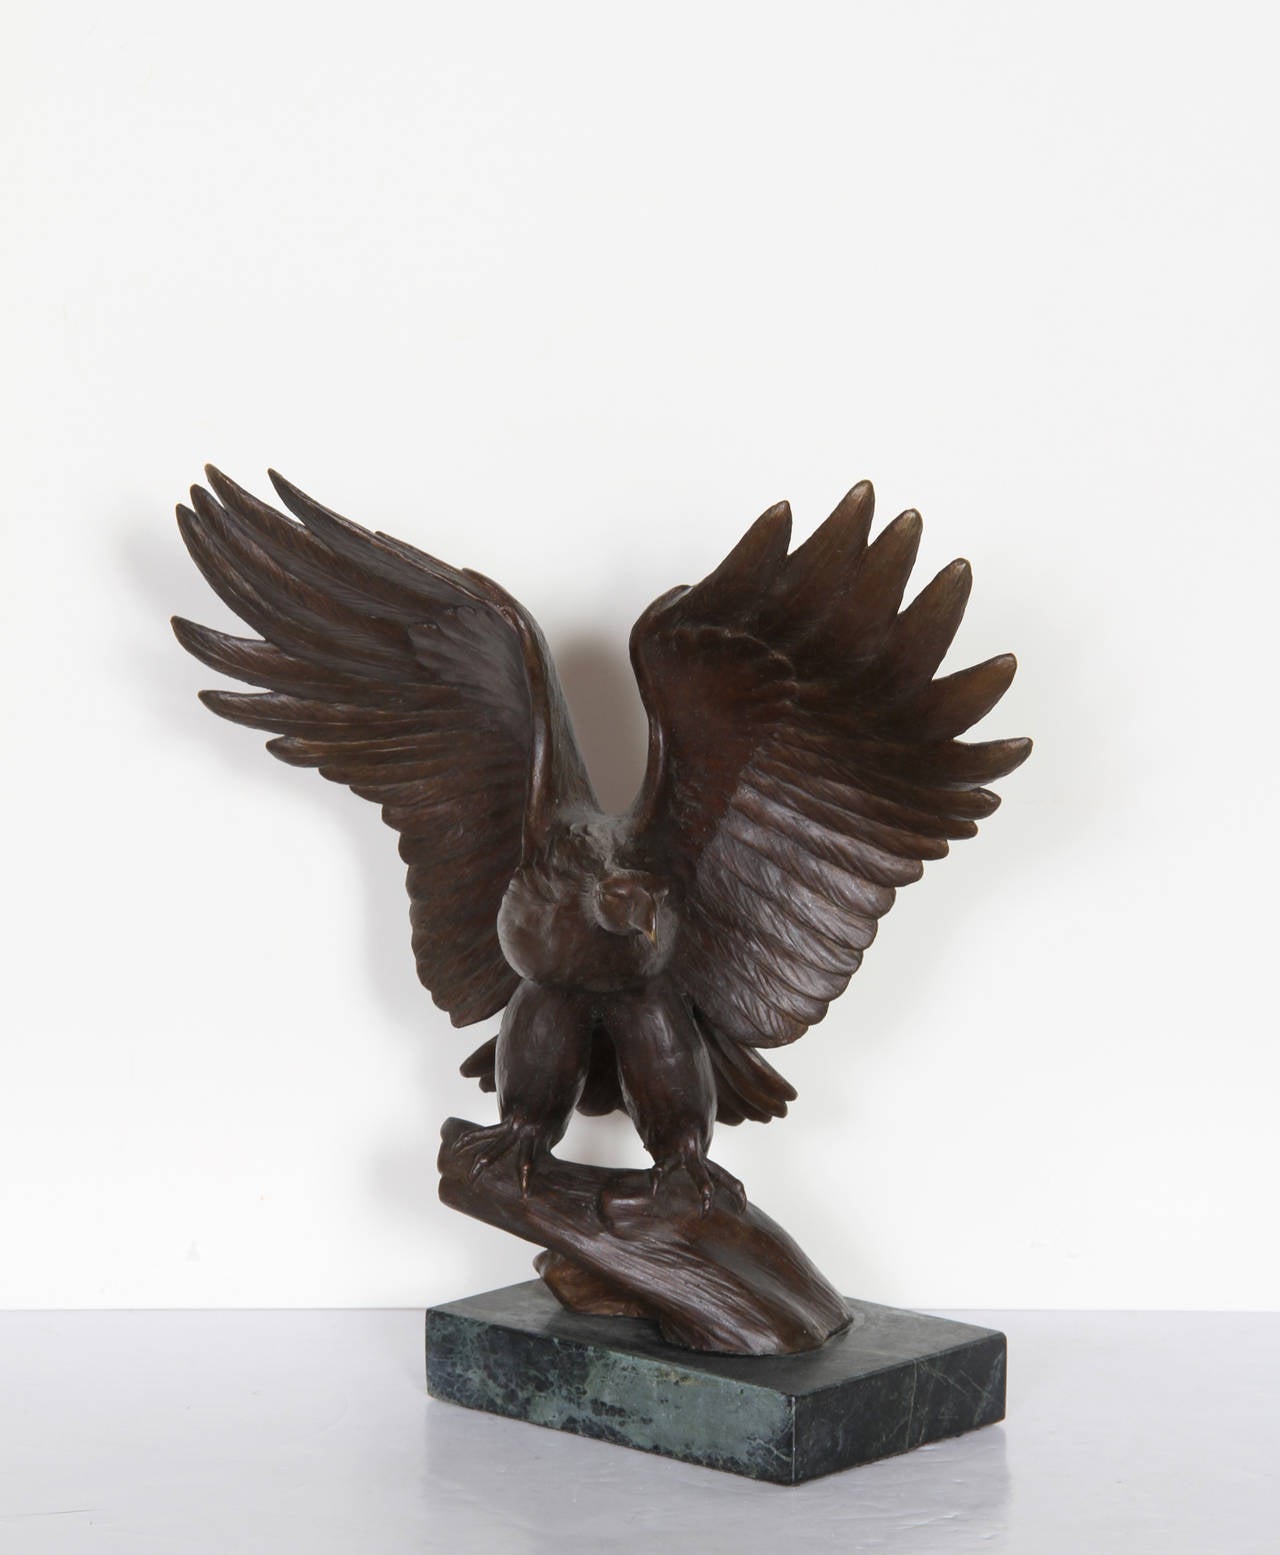 Eagle - Sculpture by Lee Harold Lux